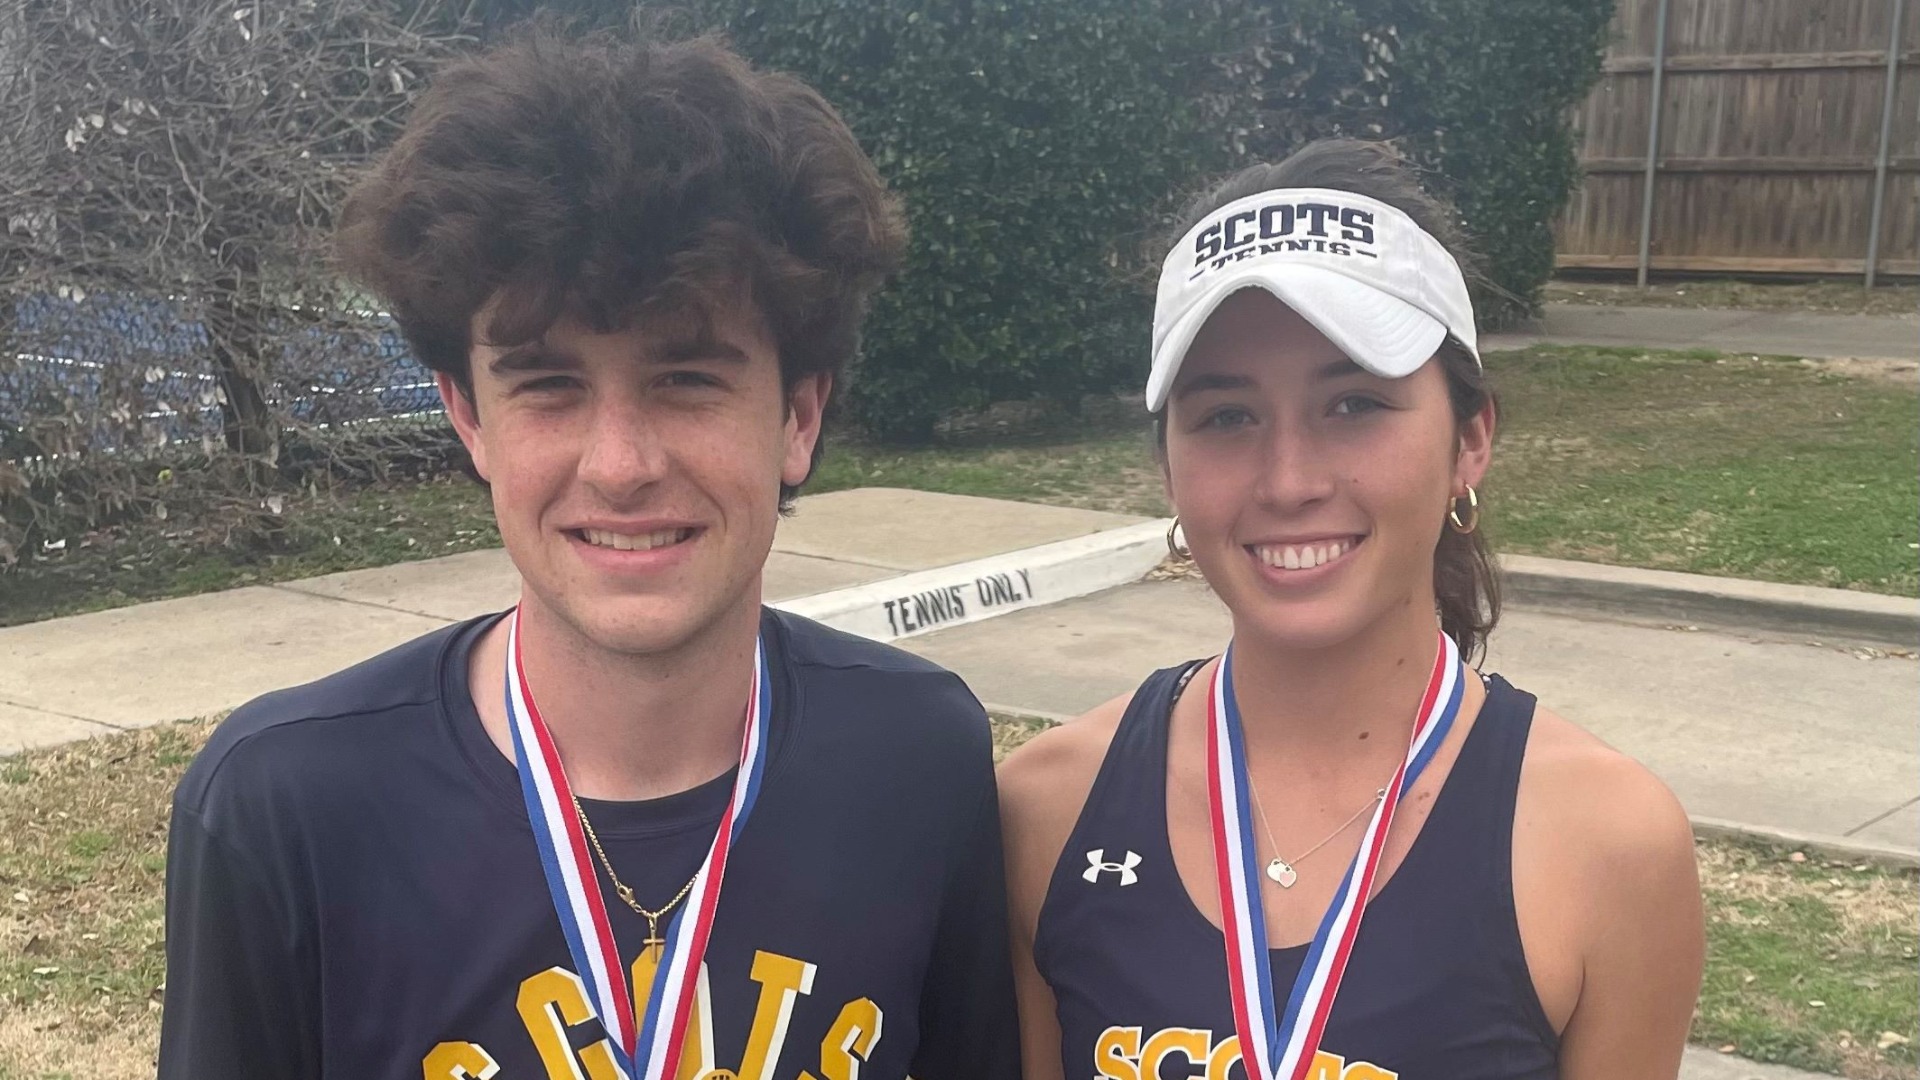 Slide 5 - Caleb Benson and Briana Rees Place 2nd at Flower Mound Varsity Tennis Tournament